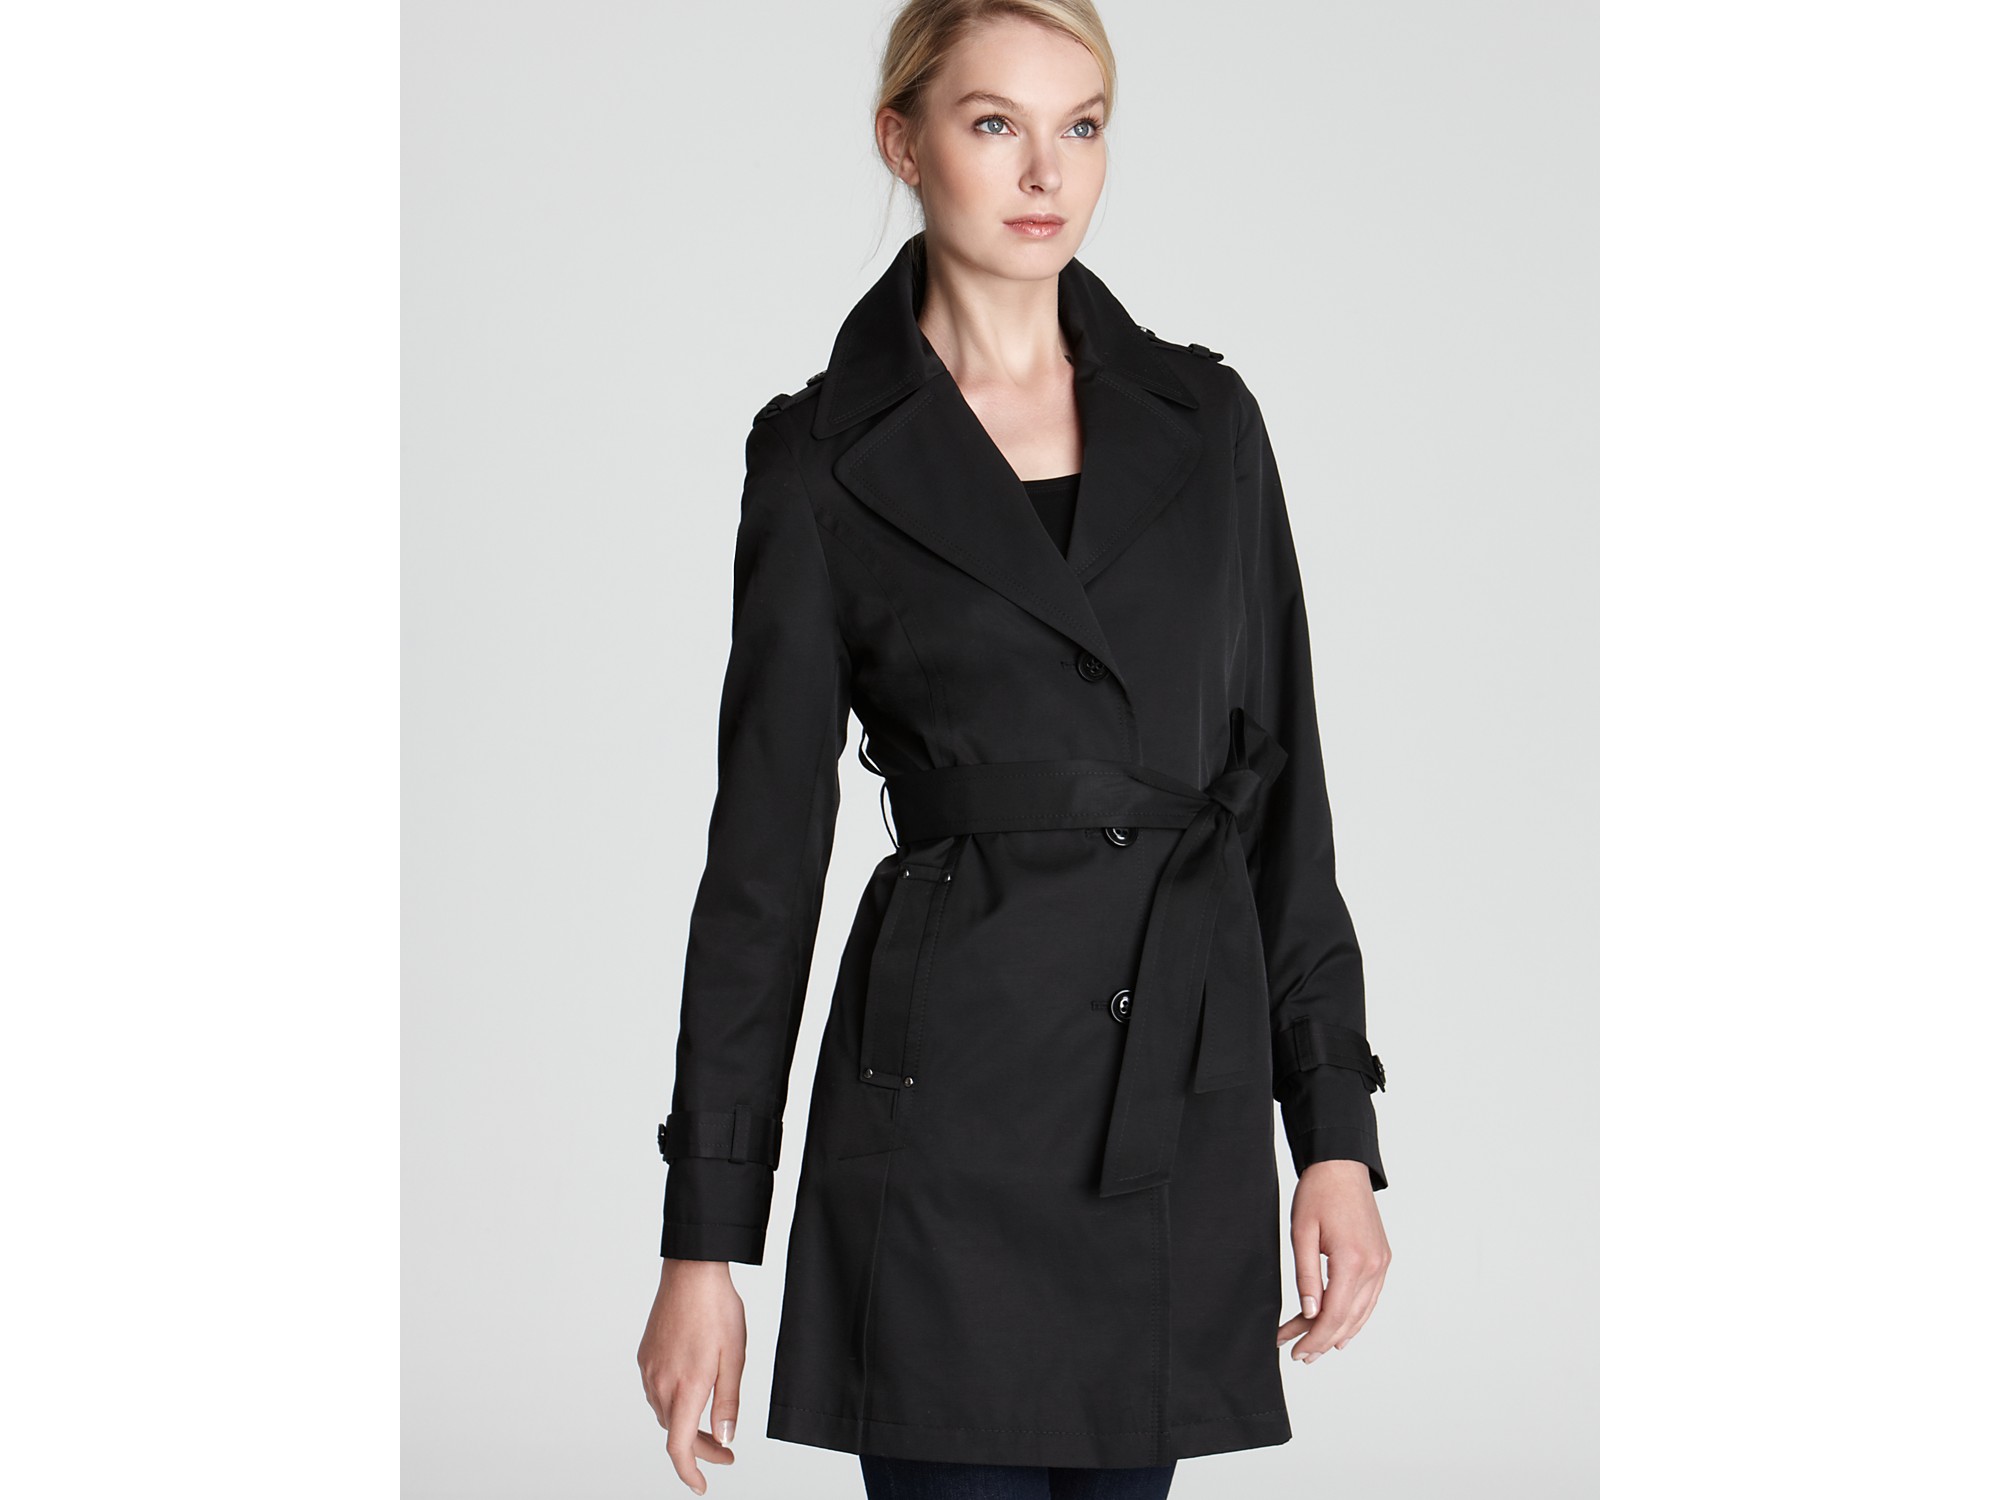 Dkny Melissa Trench Coat with Belt in Black | Lyst